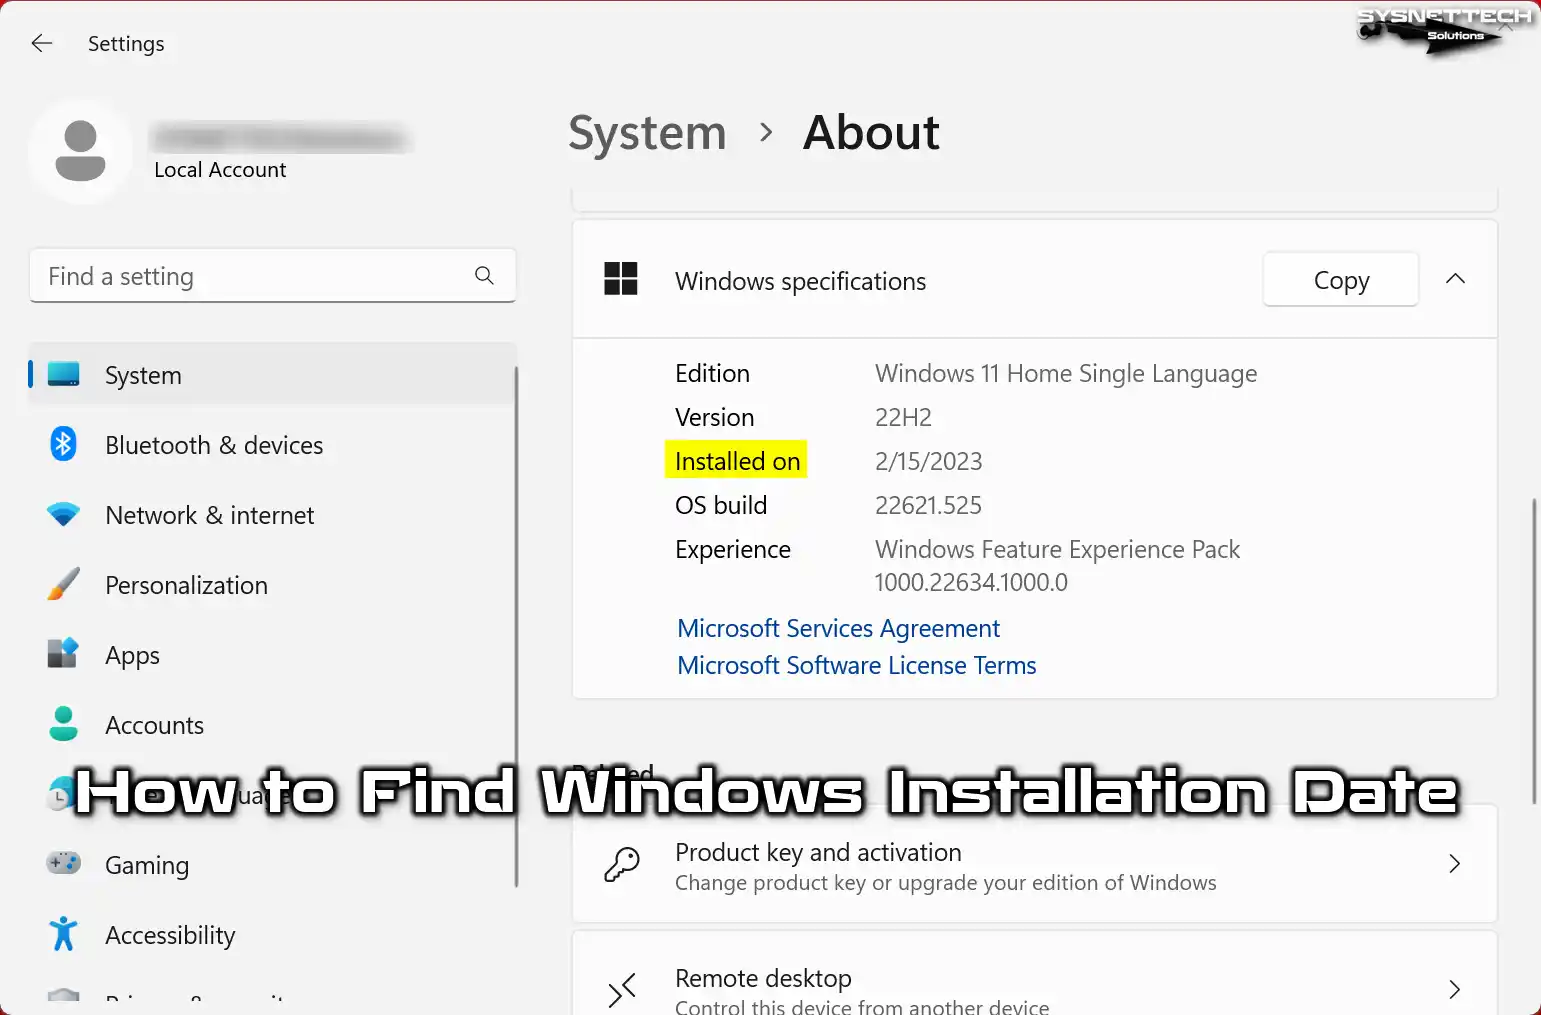 How to Find Windows Installation Date